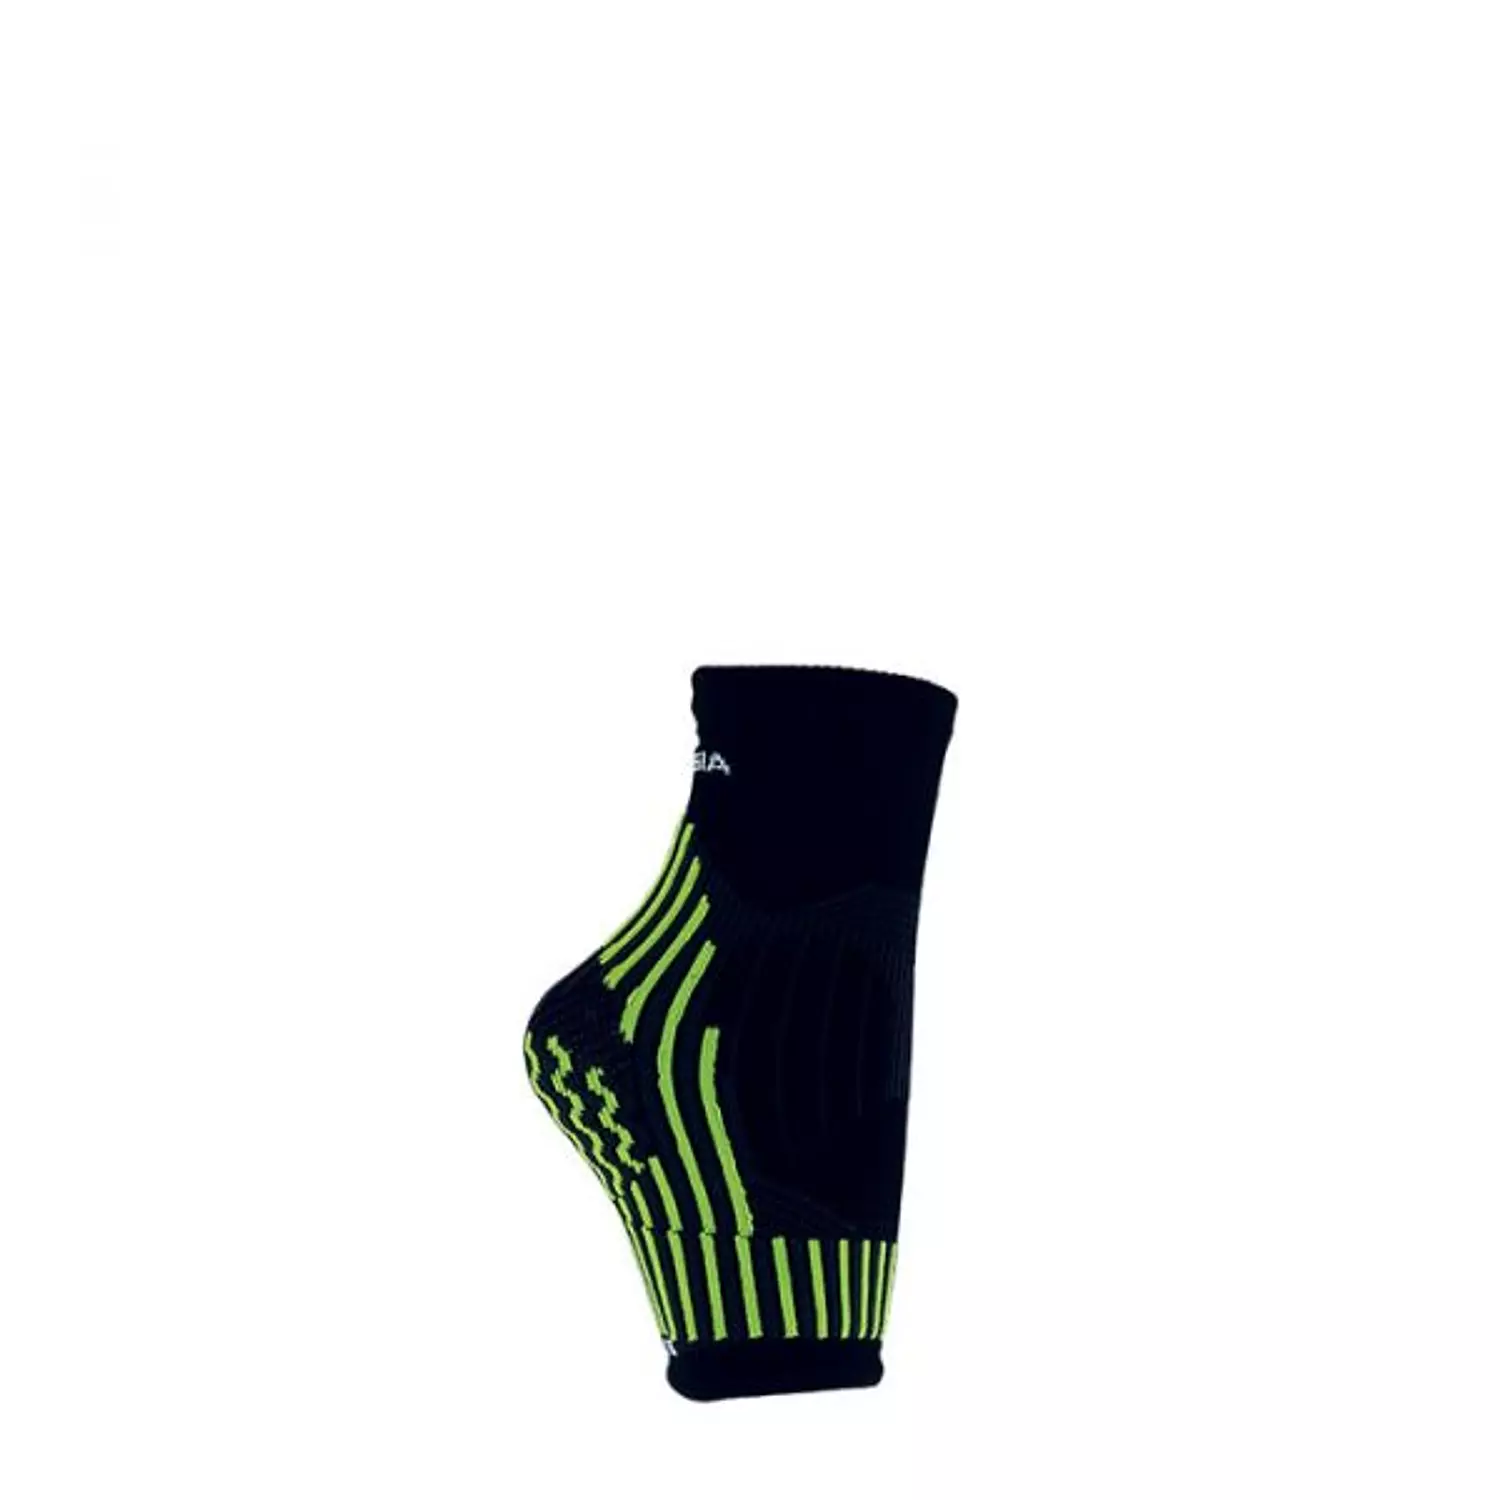 KINESIA - K913 Ankle Support Kinepower Compression Socks (One Size) 4